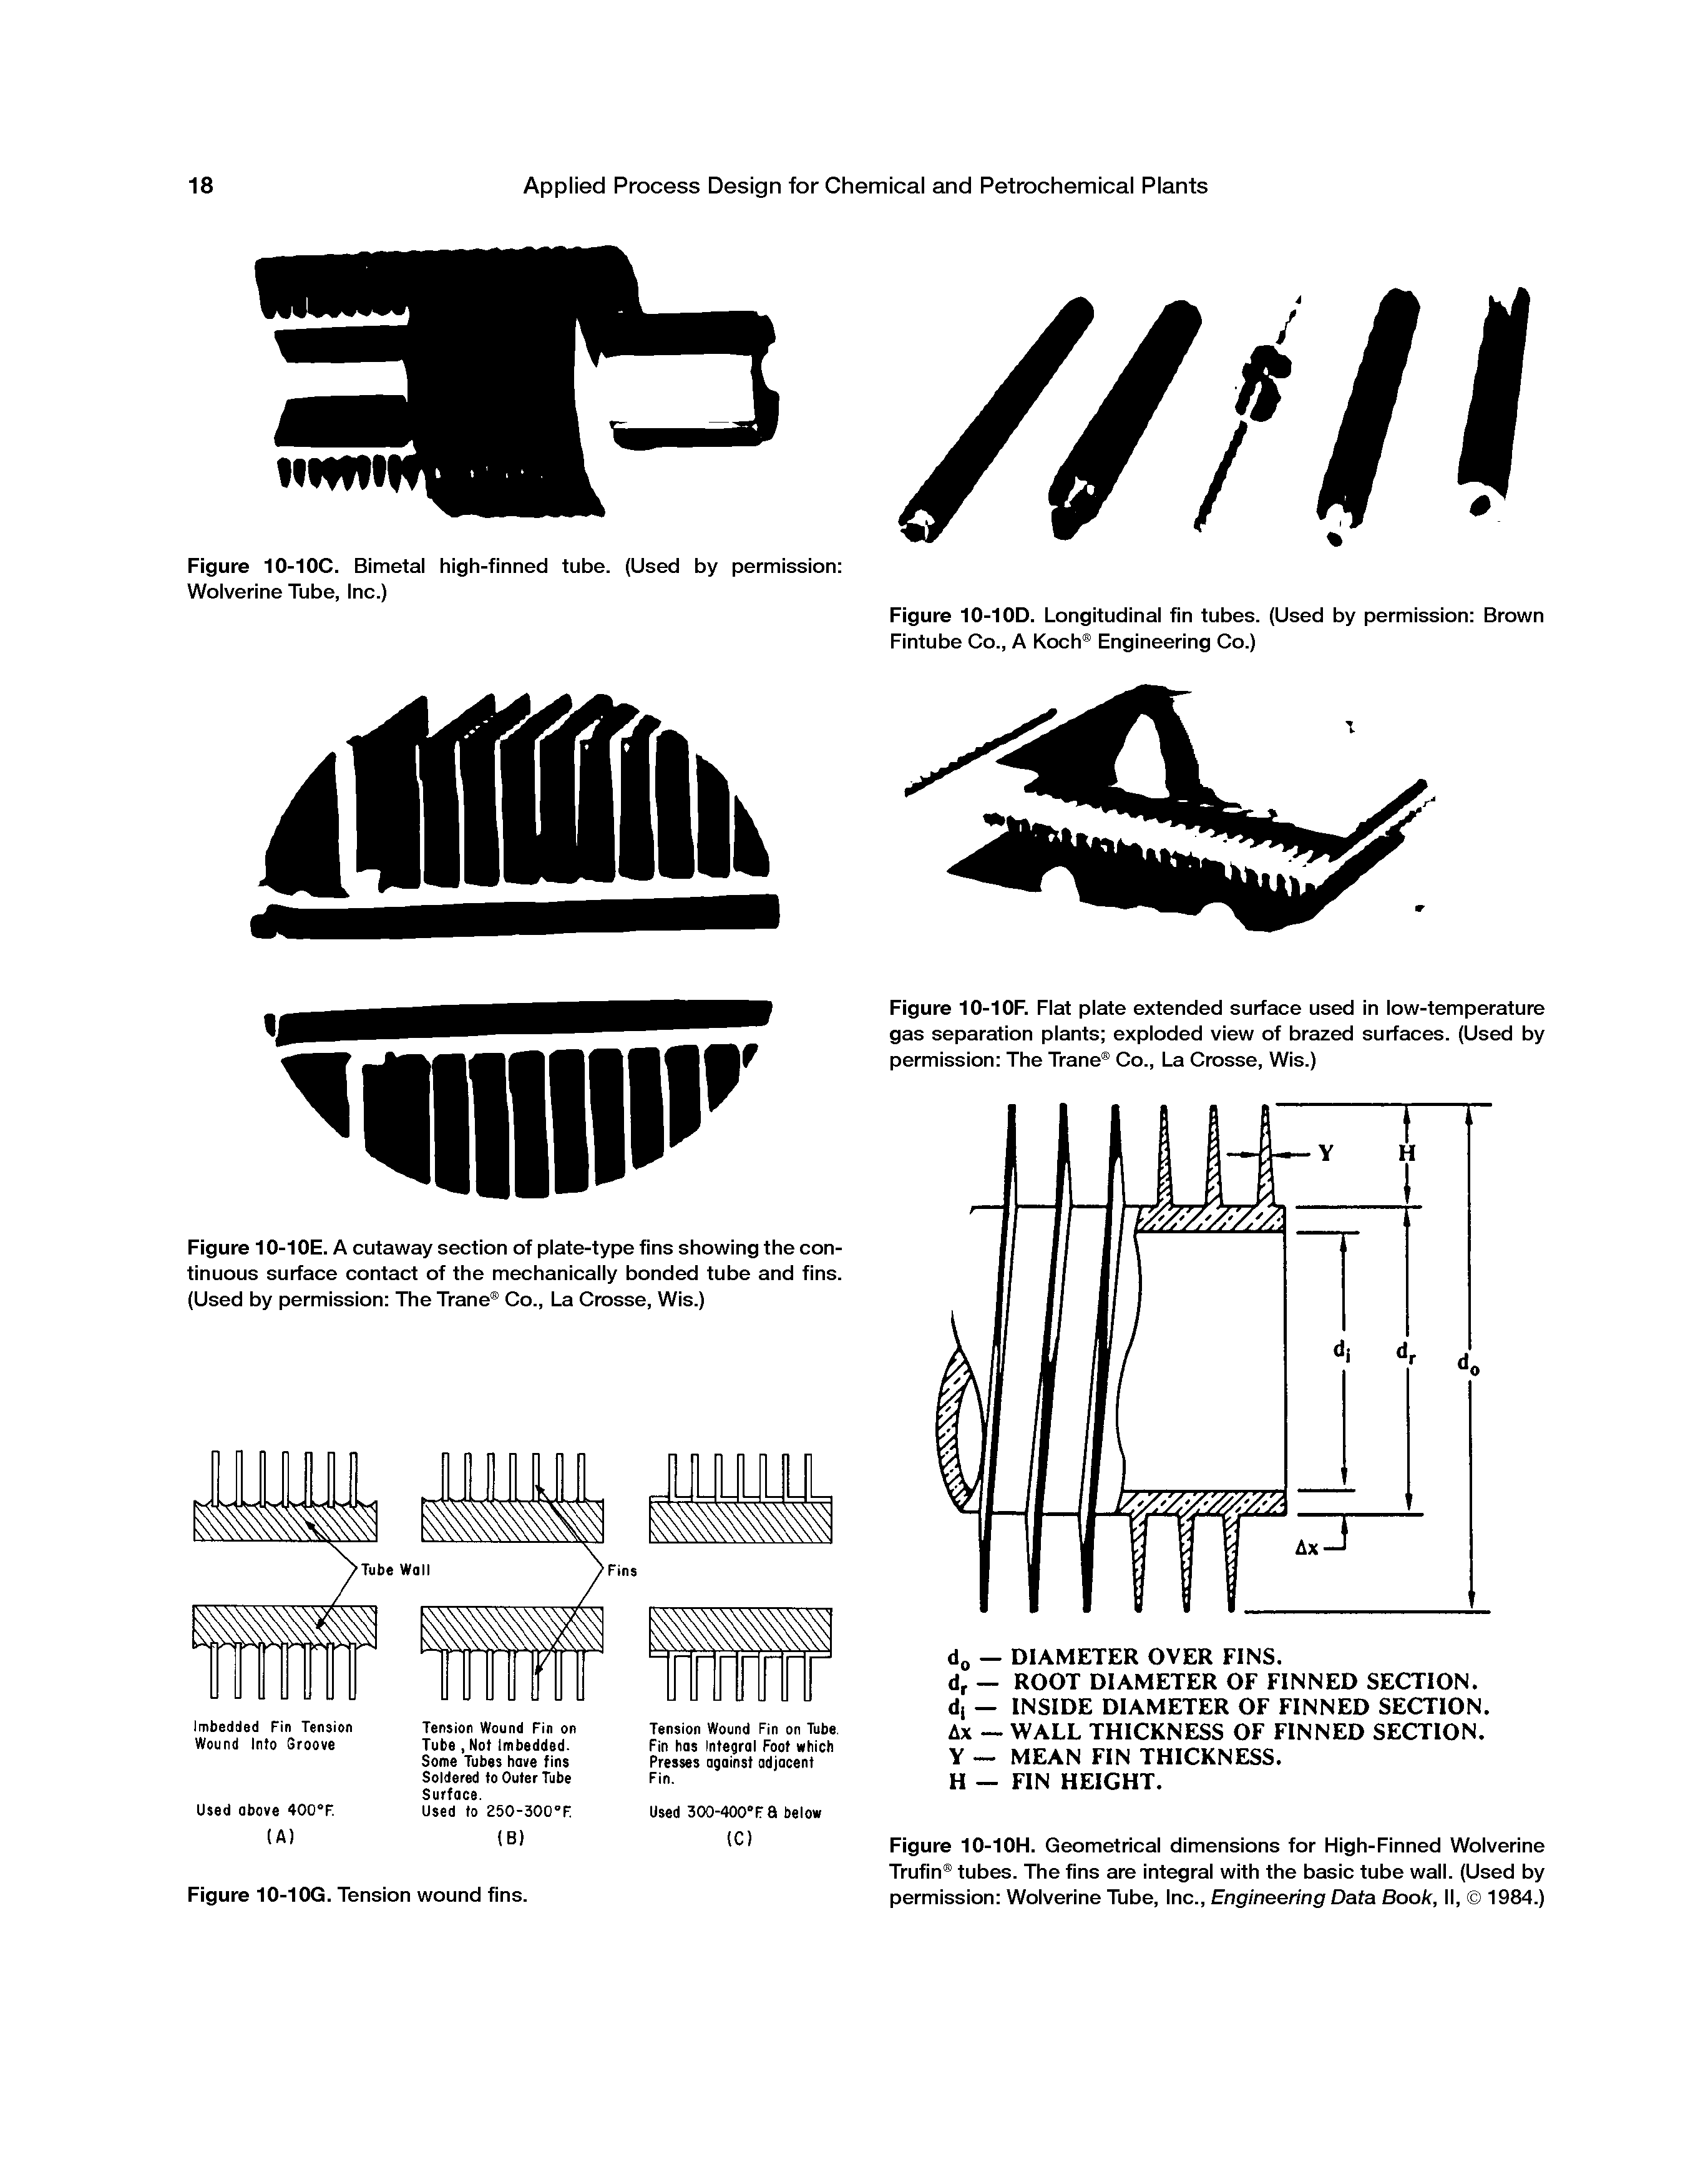 Figure 10-10H. Geometrical dimensions for High-Finned Wolverine Trufin tubes. The fins are integral with the basic tube wall. (Used by permission Wolverine Tube, Inc., Engineering Data Book, II, 1984.)...